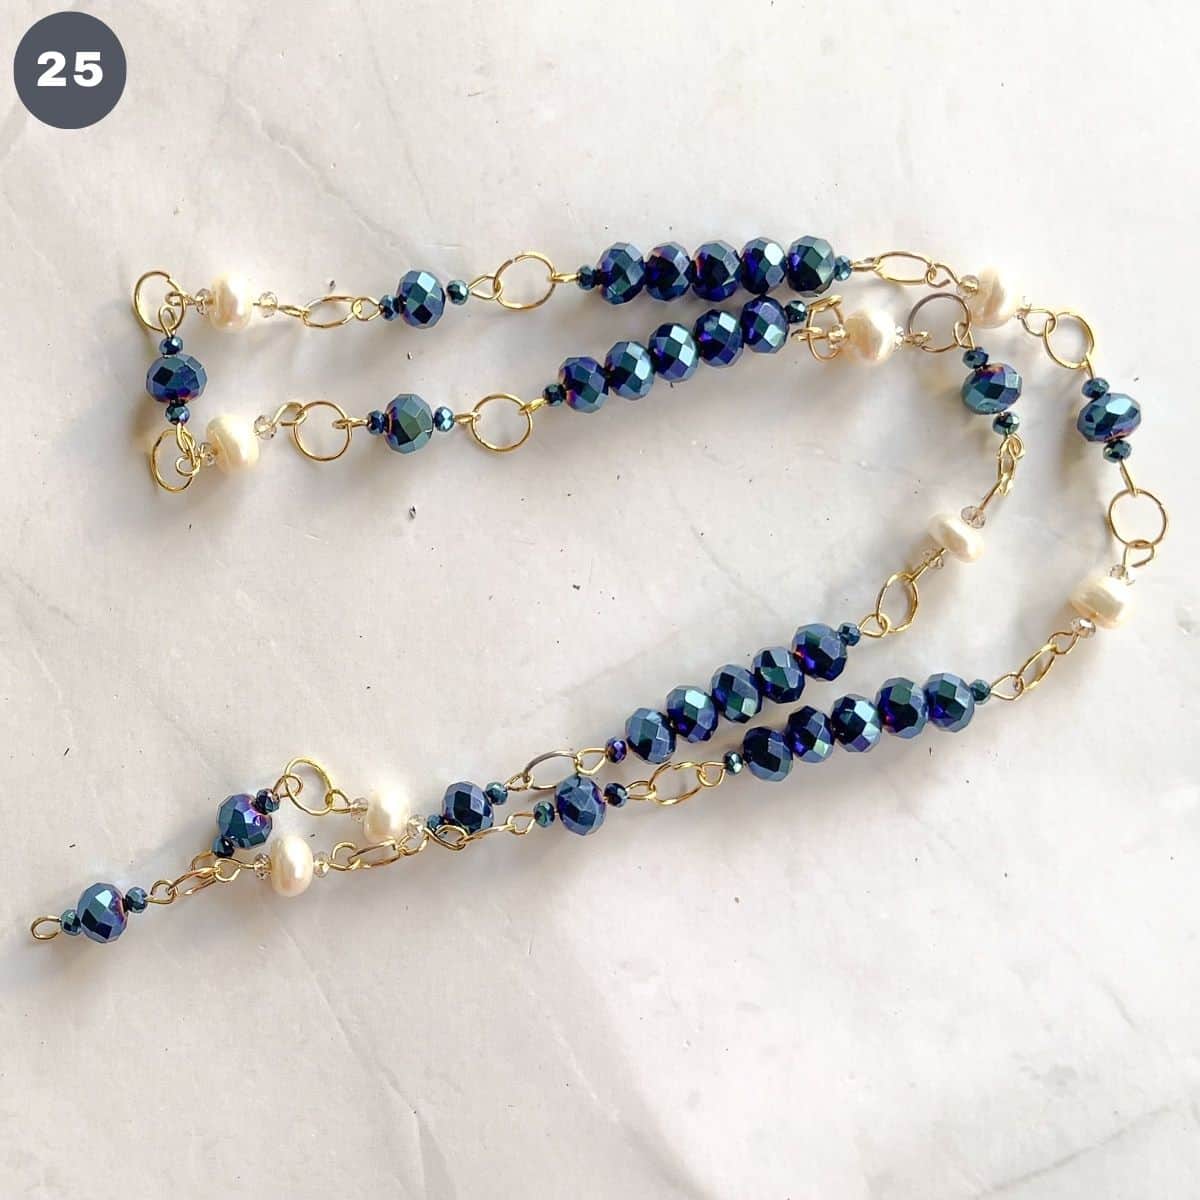 A stand of bead necklace in blue and white.